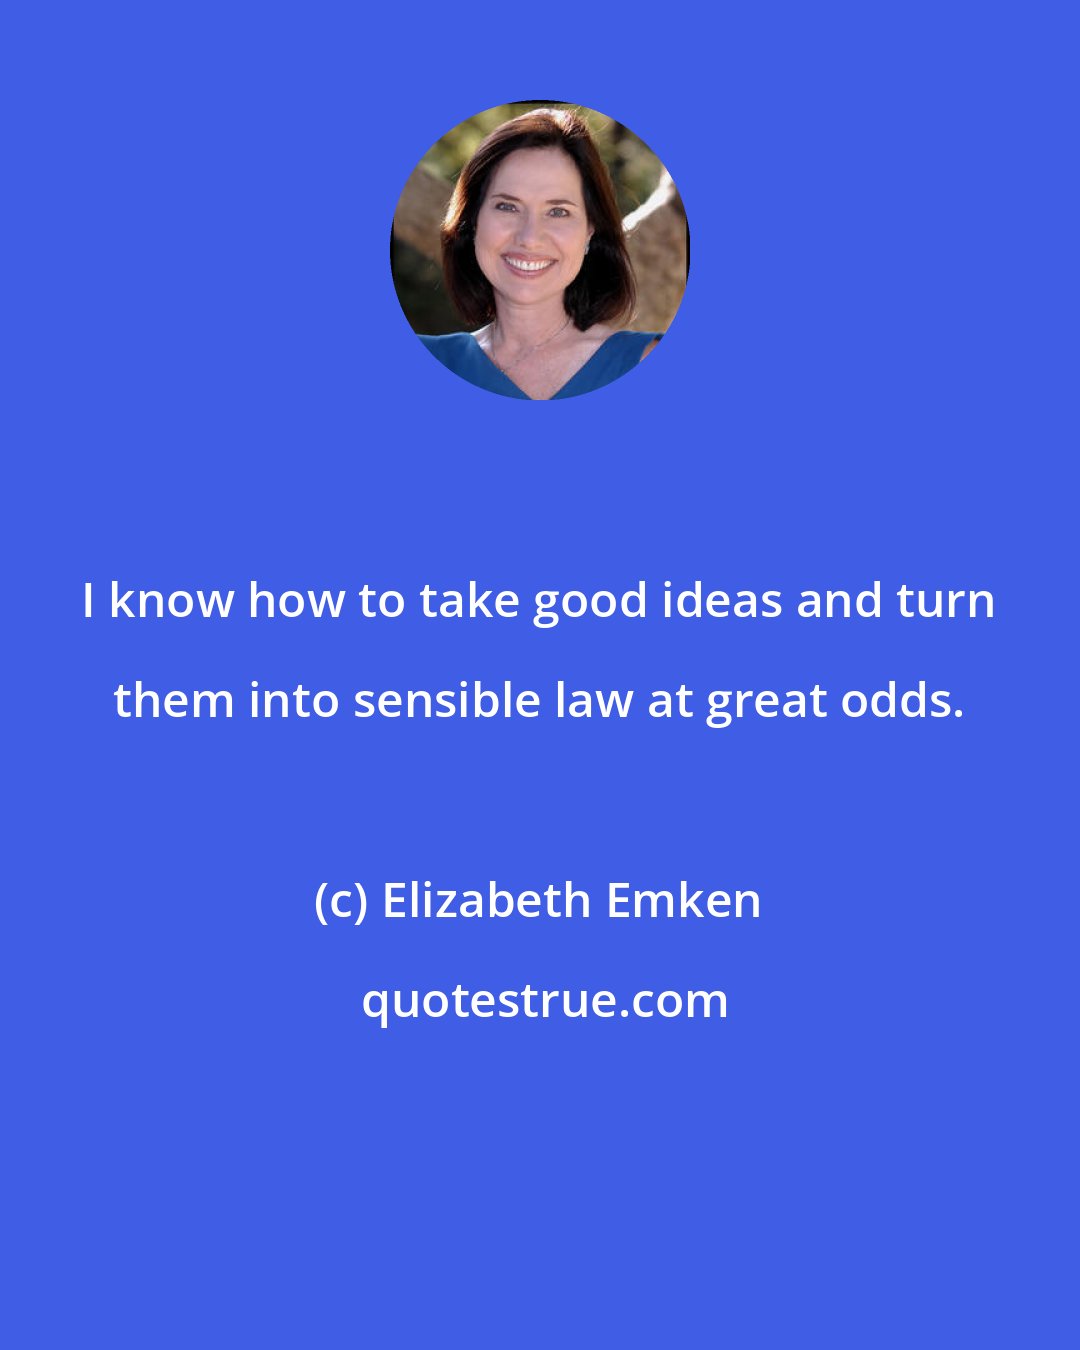 Elizabeth Emken: I know how to take good ideas and turn them into sensible law at great odds.